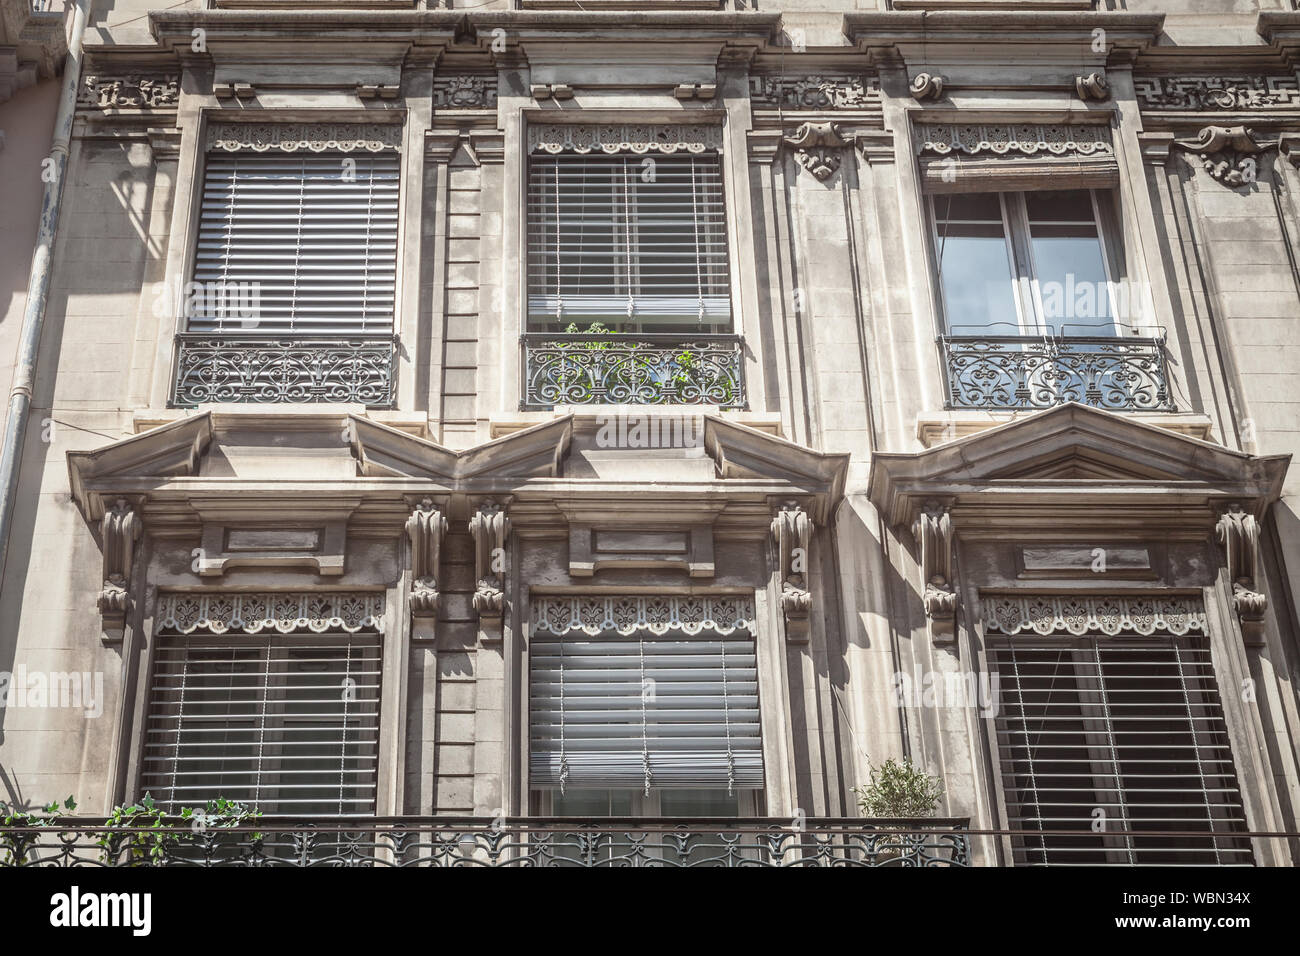 Typical Haussmann style facades, from the 19th century, traditional in the city centers of French cities such as Paris and Lyon, with their traditiona Stock Photo